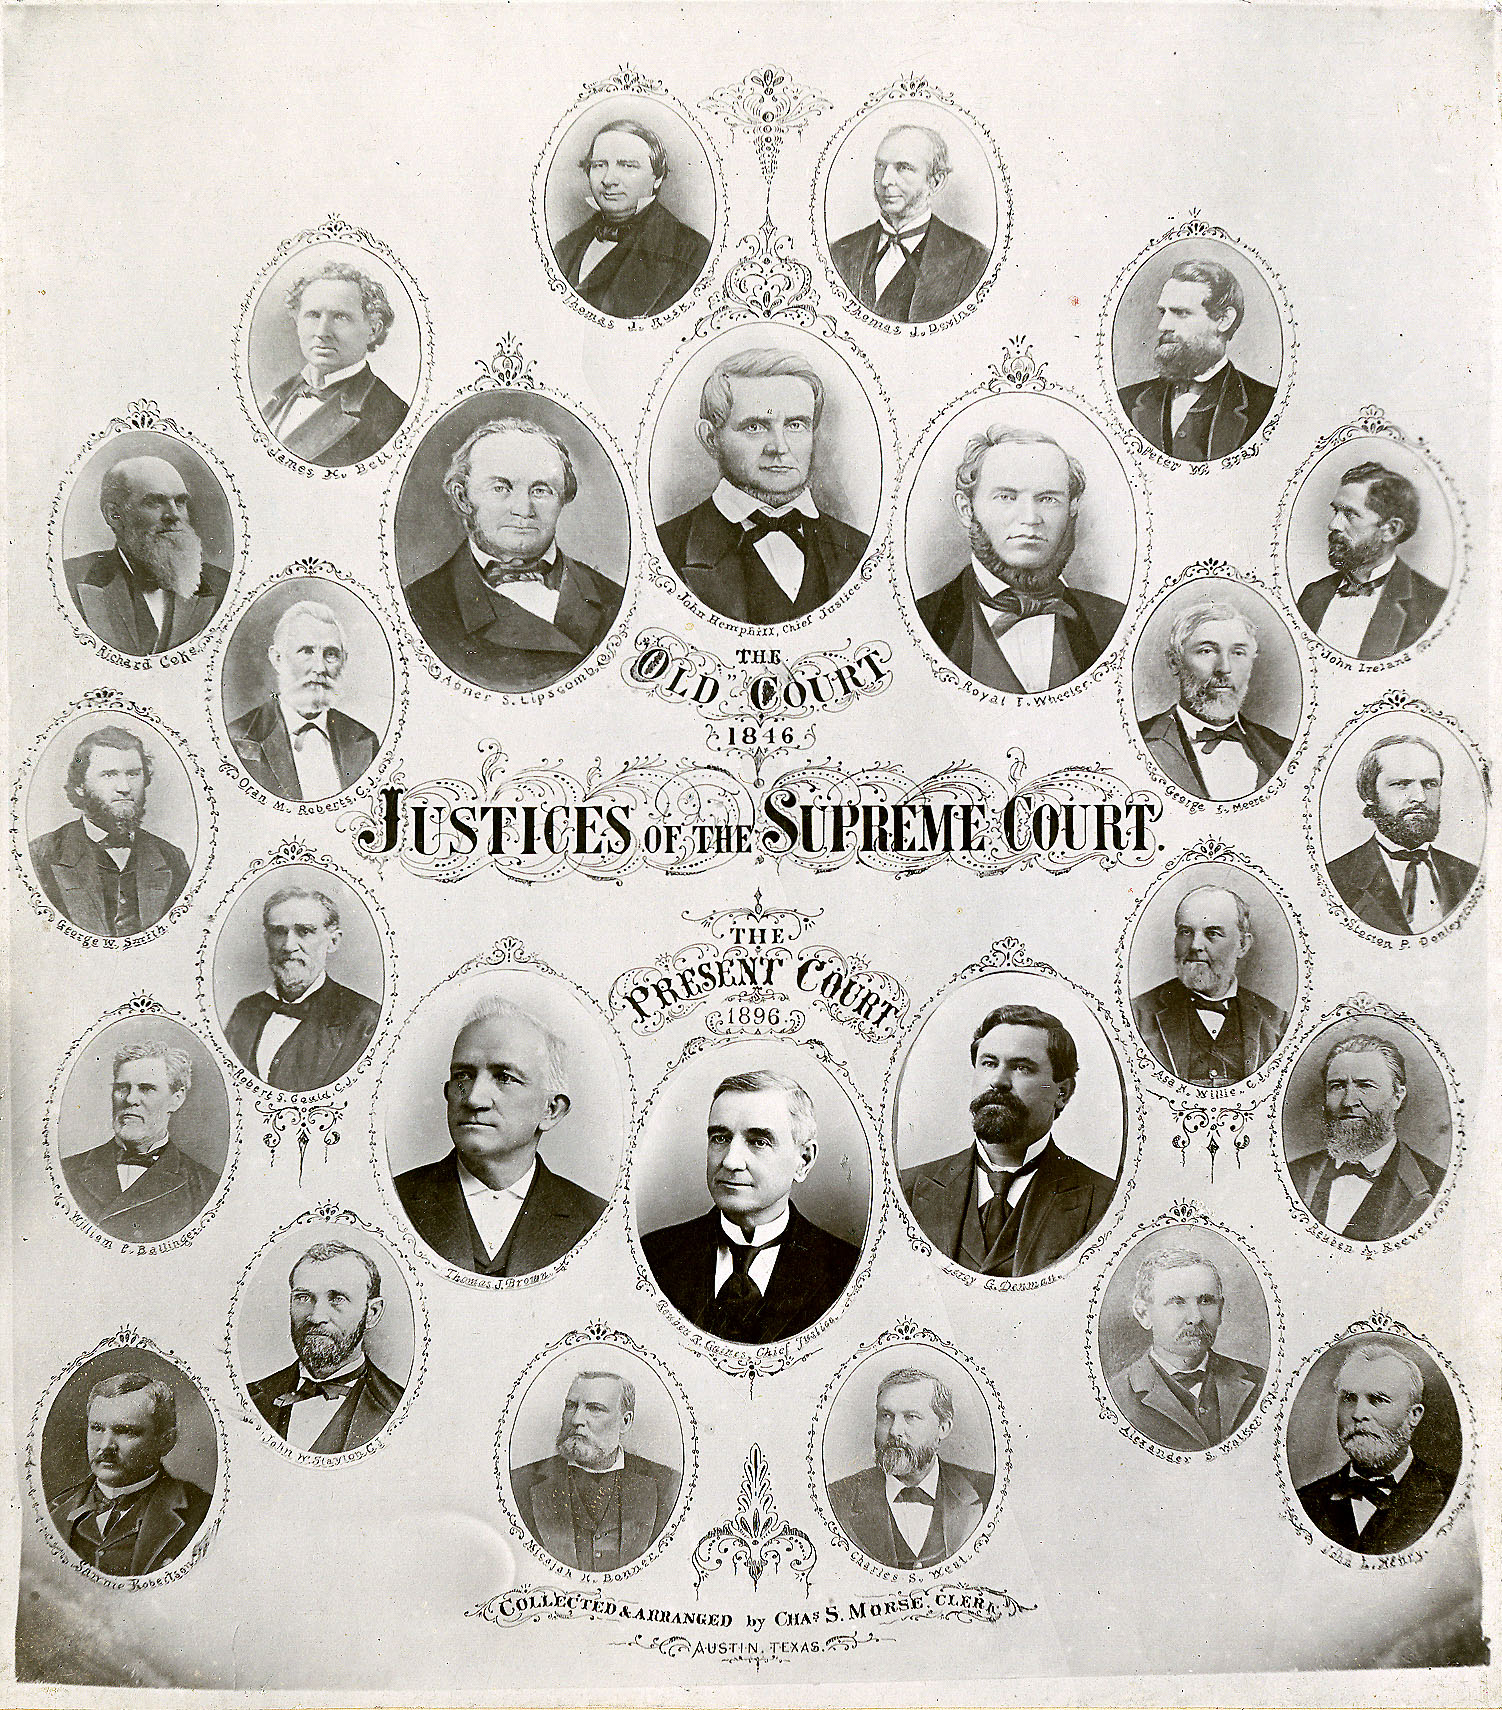 1896 50th Anniversary Cabinet Card, featuring portraits of the 1846 and 1896 justices. Photo: Texas Supreme Court Archives.